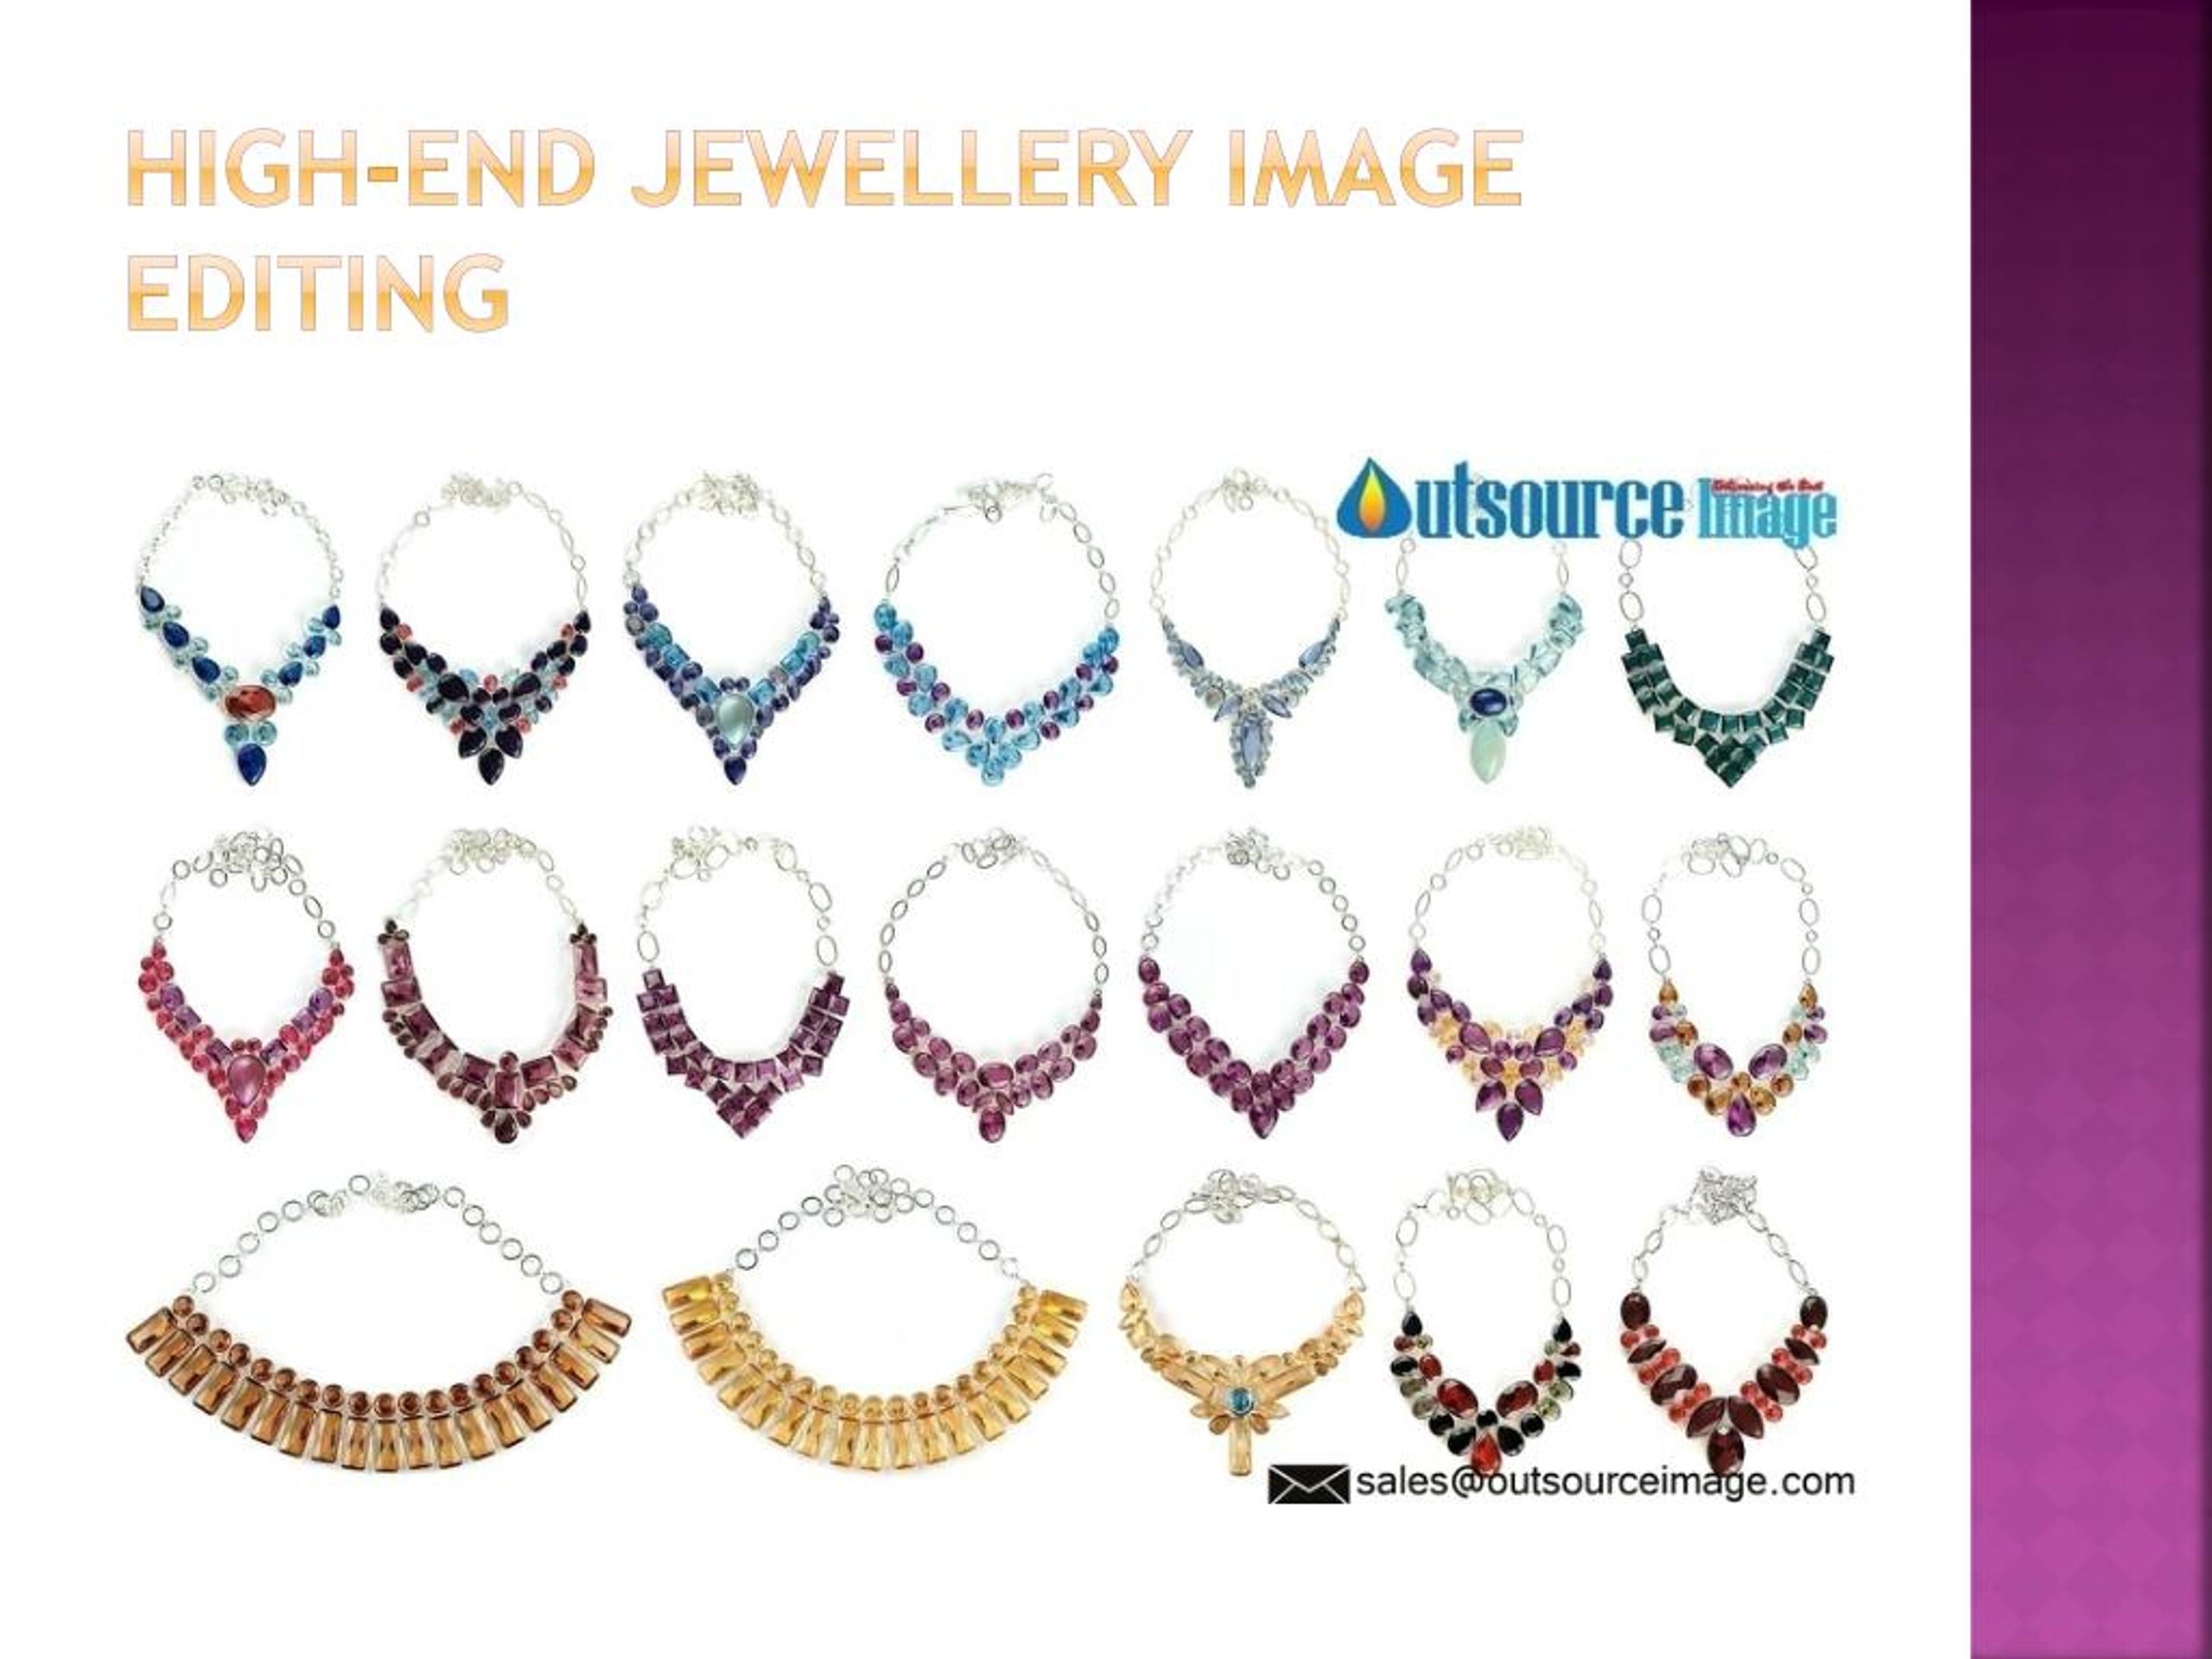 PPT - High-end jewellery photo retouching and editing services ...